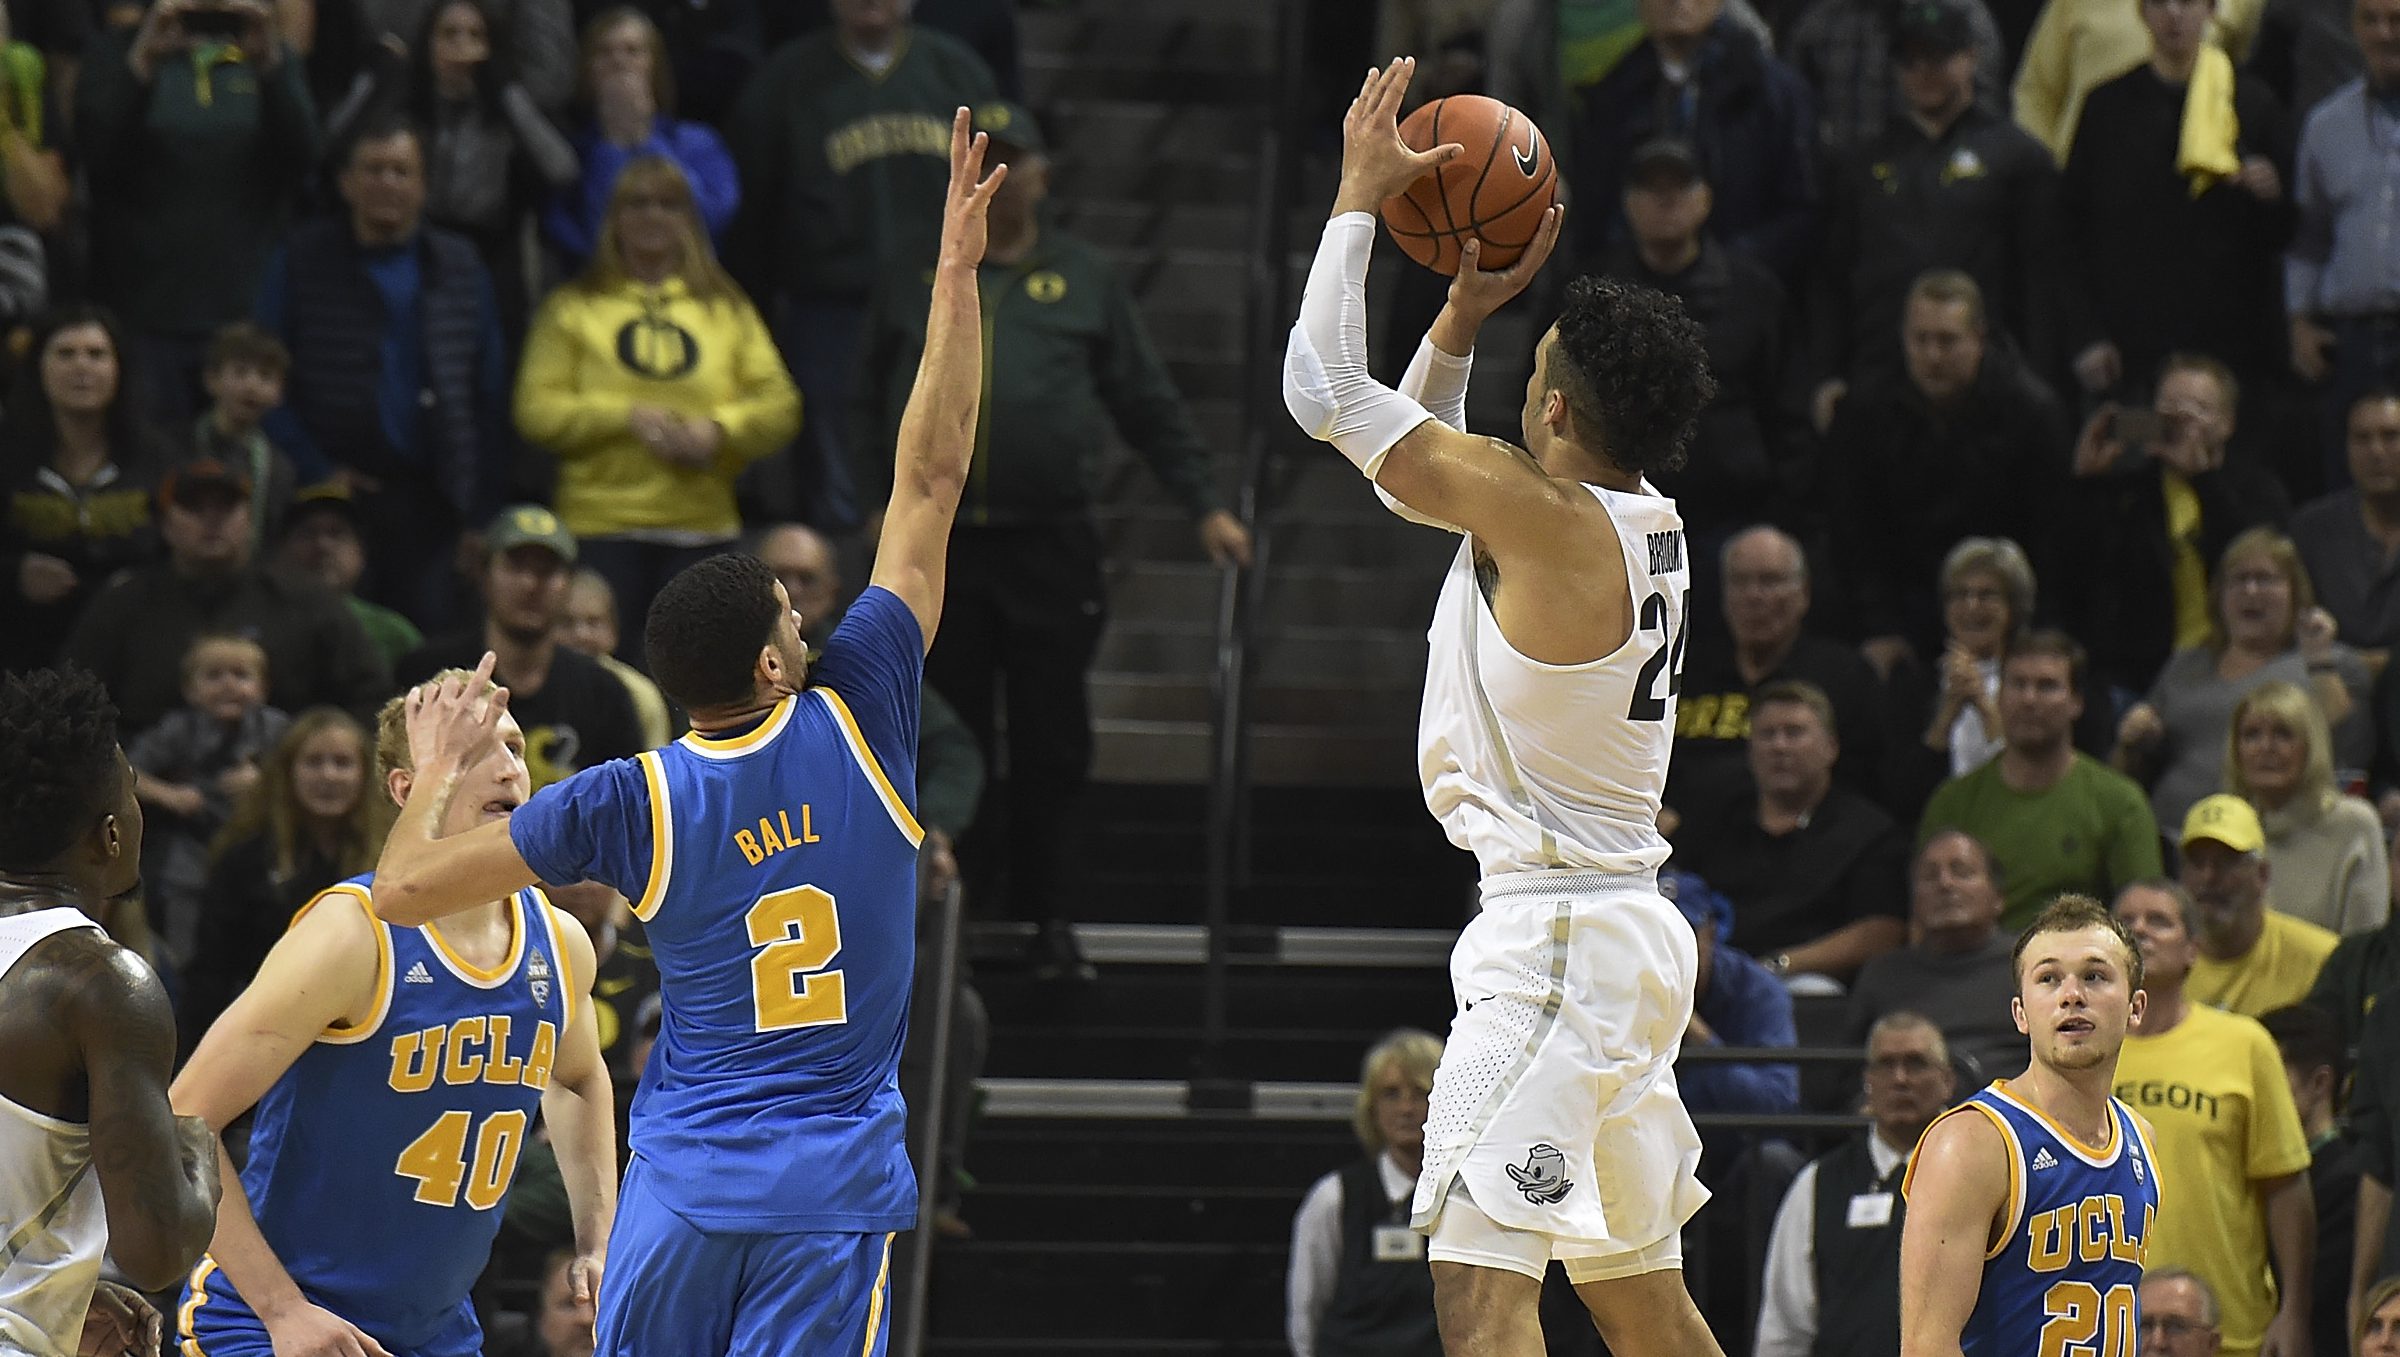 EUGENE, OR - DECEMBER 28: Dillon Brooks #24 of the Oregon Ducks hits the game winning shot over Lonzo Ball #2 and Bryce Alford #20 of the UCLA Bruins on December 28, 2016 at Matthew Knight Arena in Eugene, Oregon. (Photo by Steve Dykes/Getty Images)